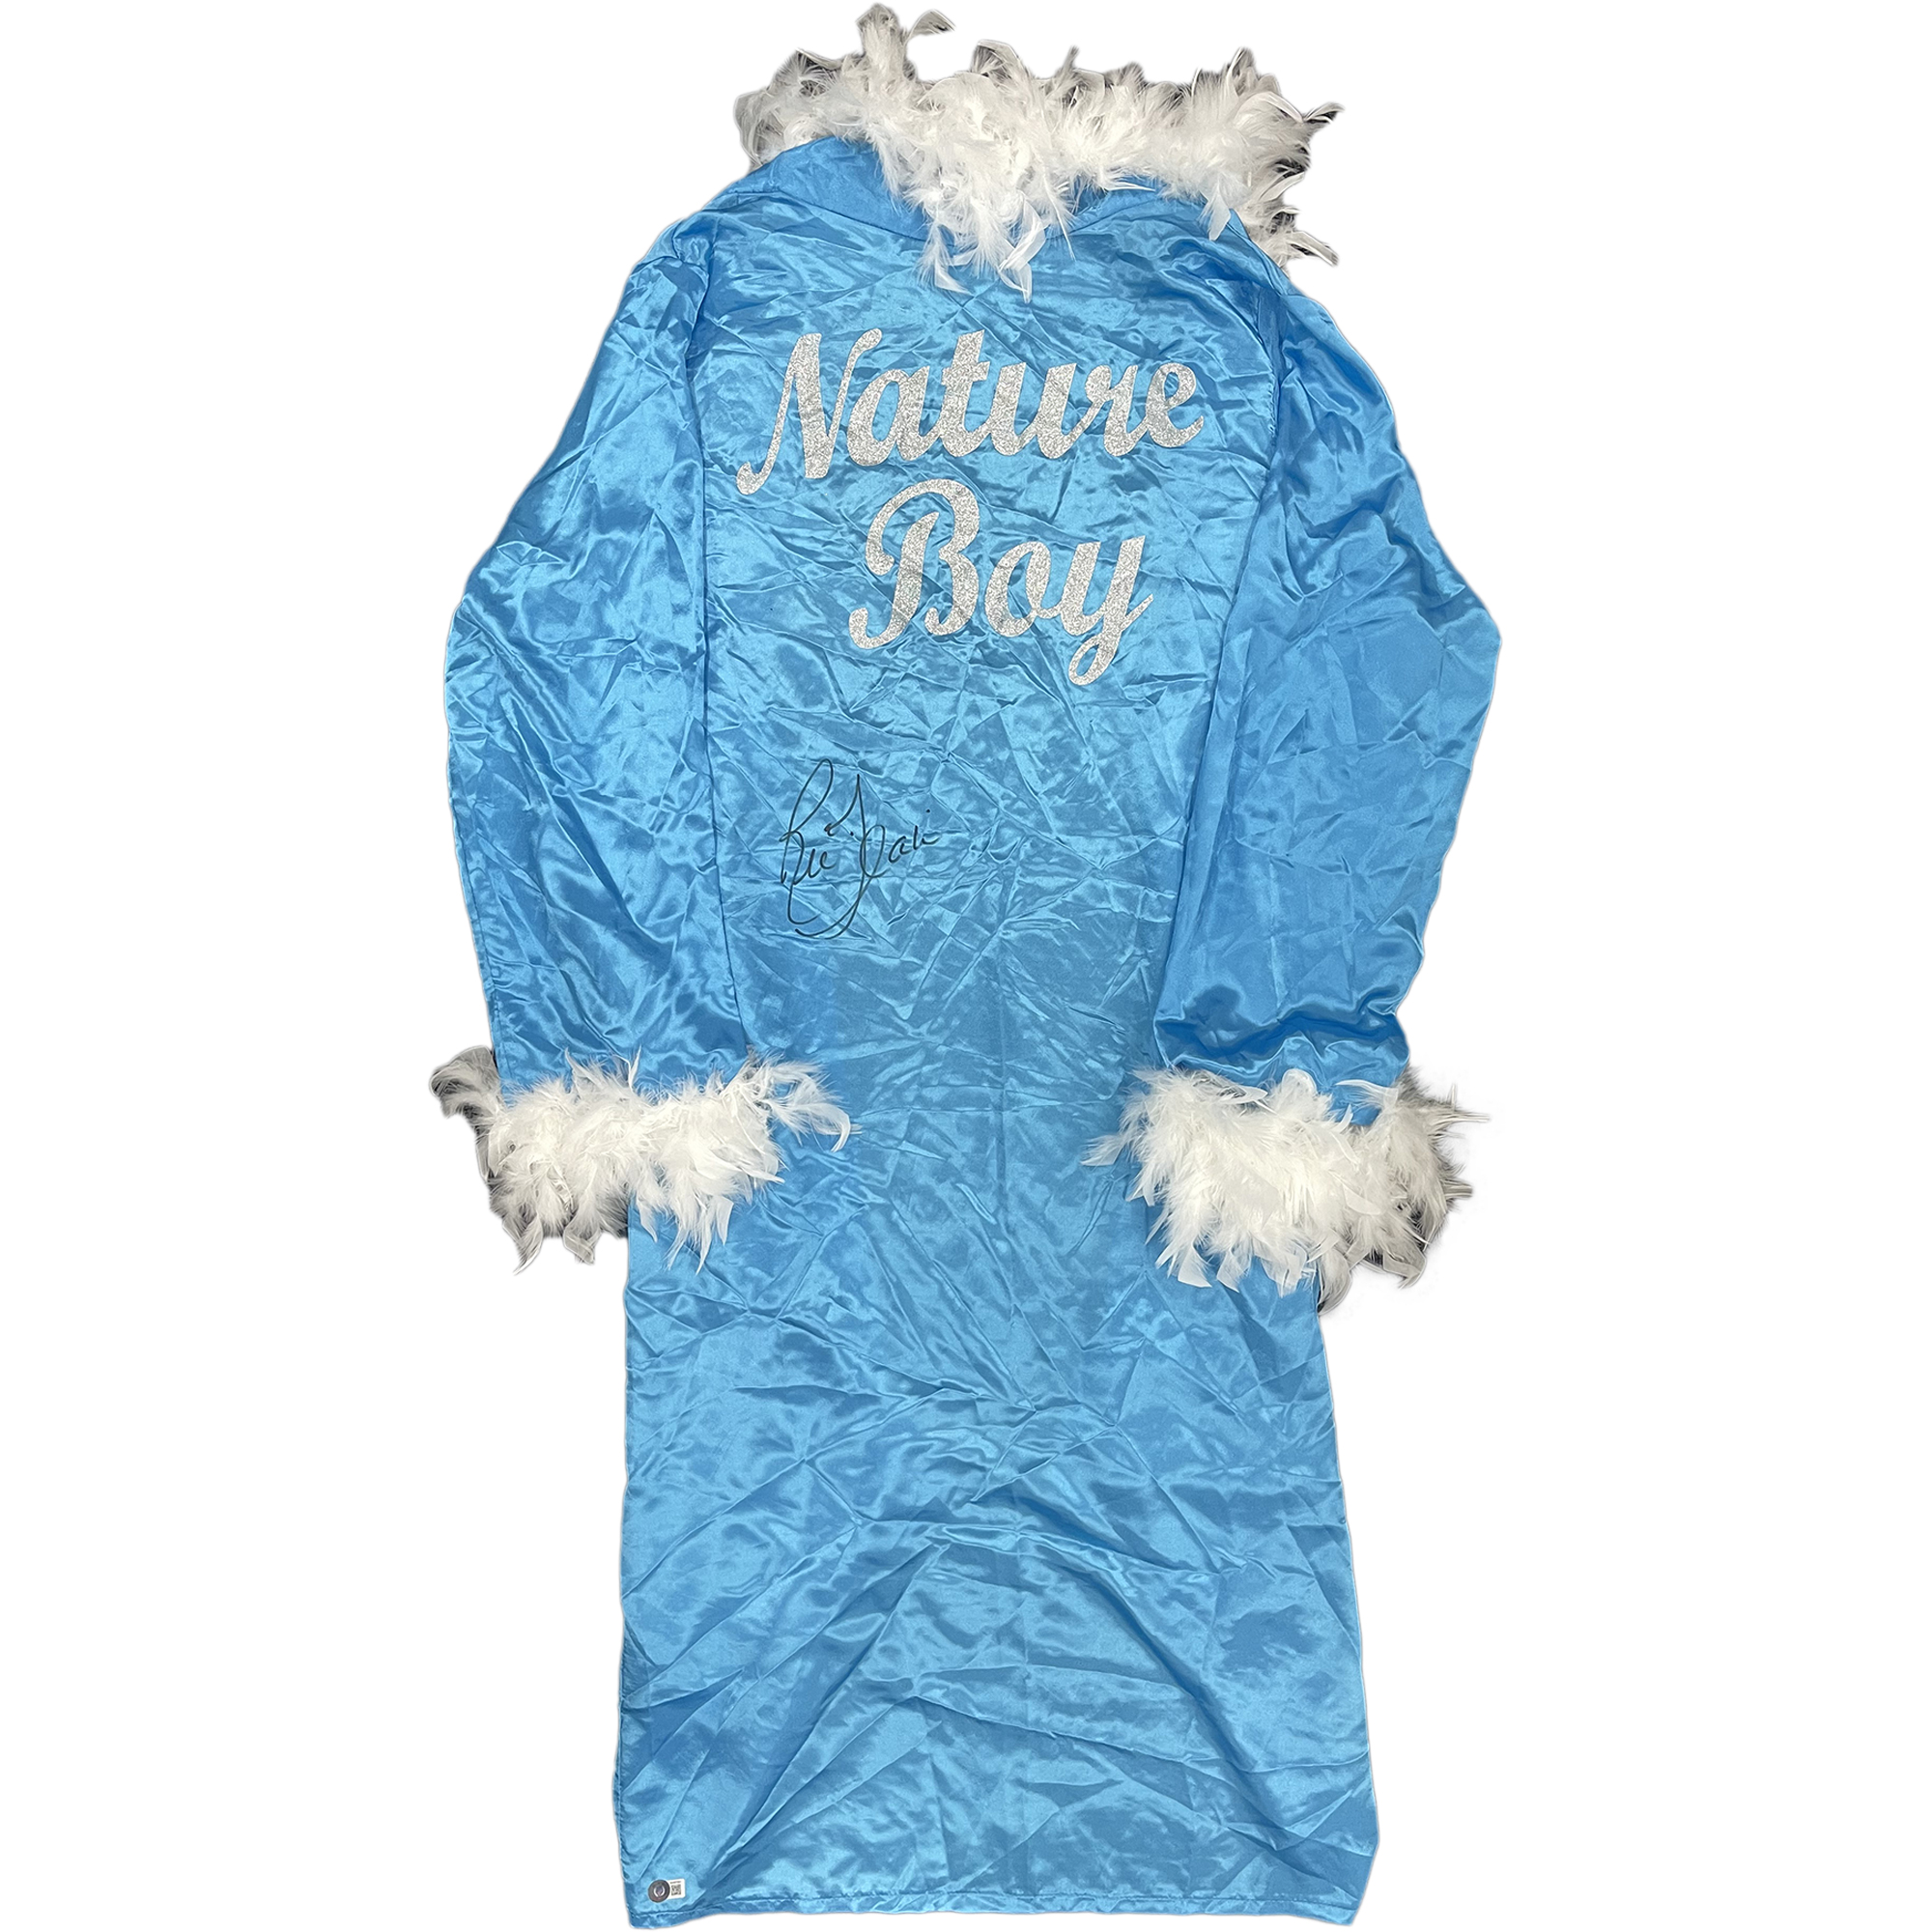 WWE – Ric Flair Hand Signed “Nature Boy” Full Size R...